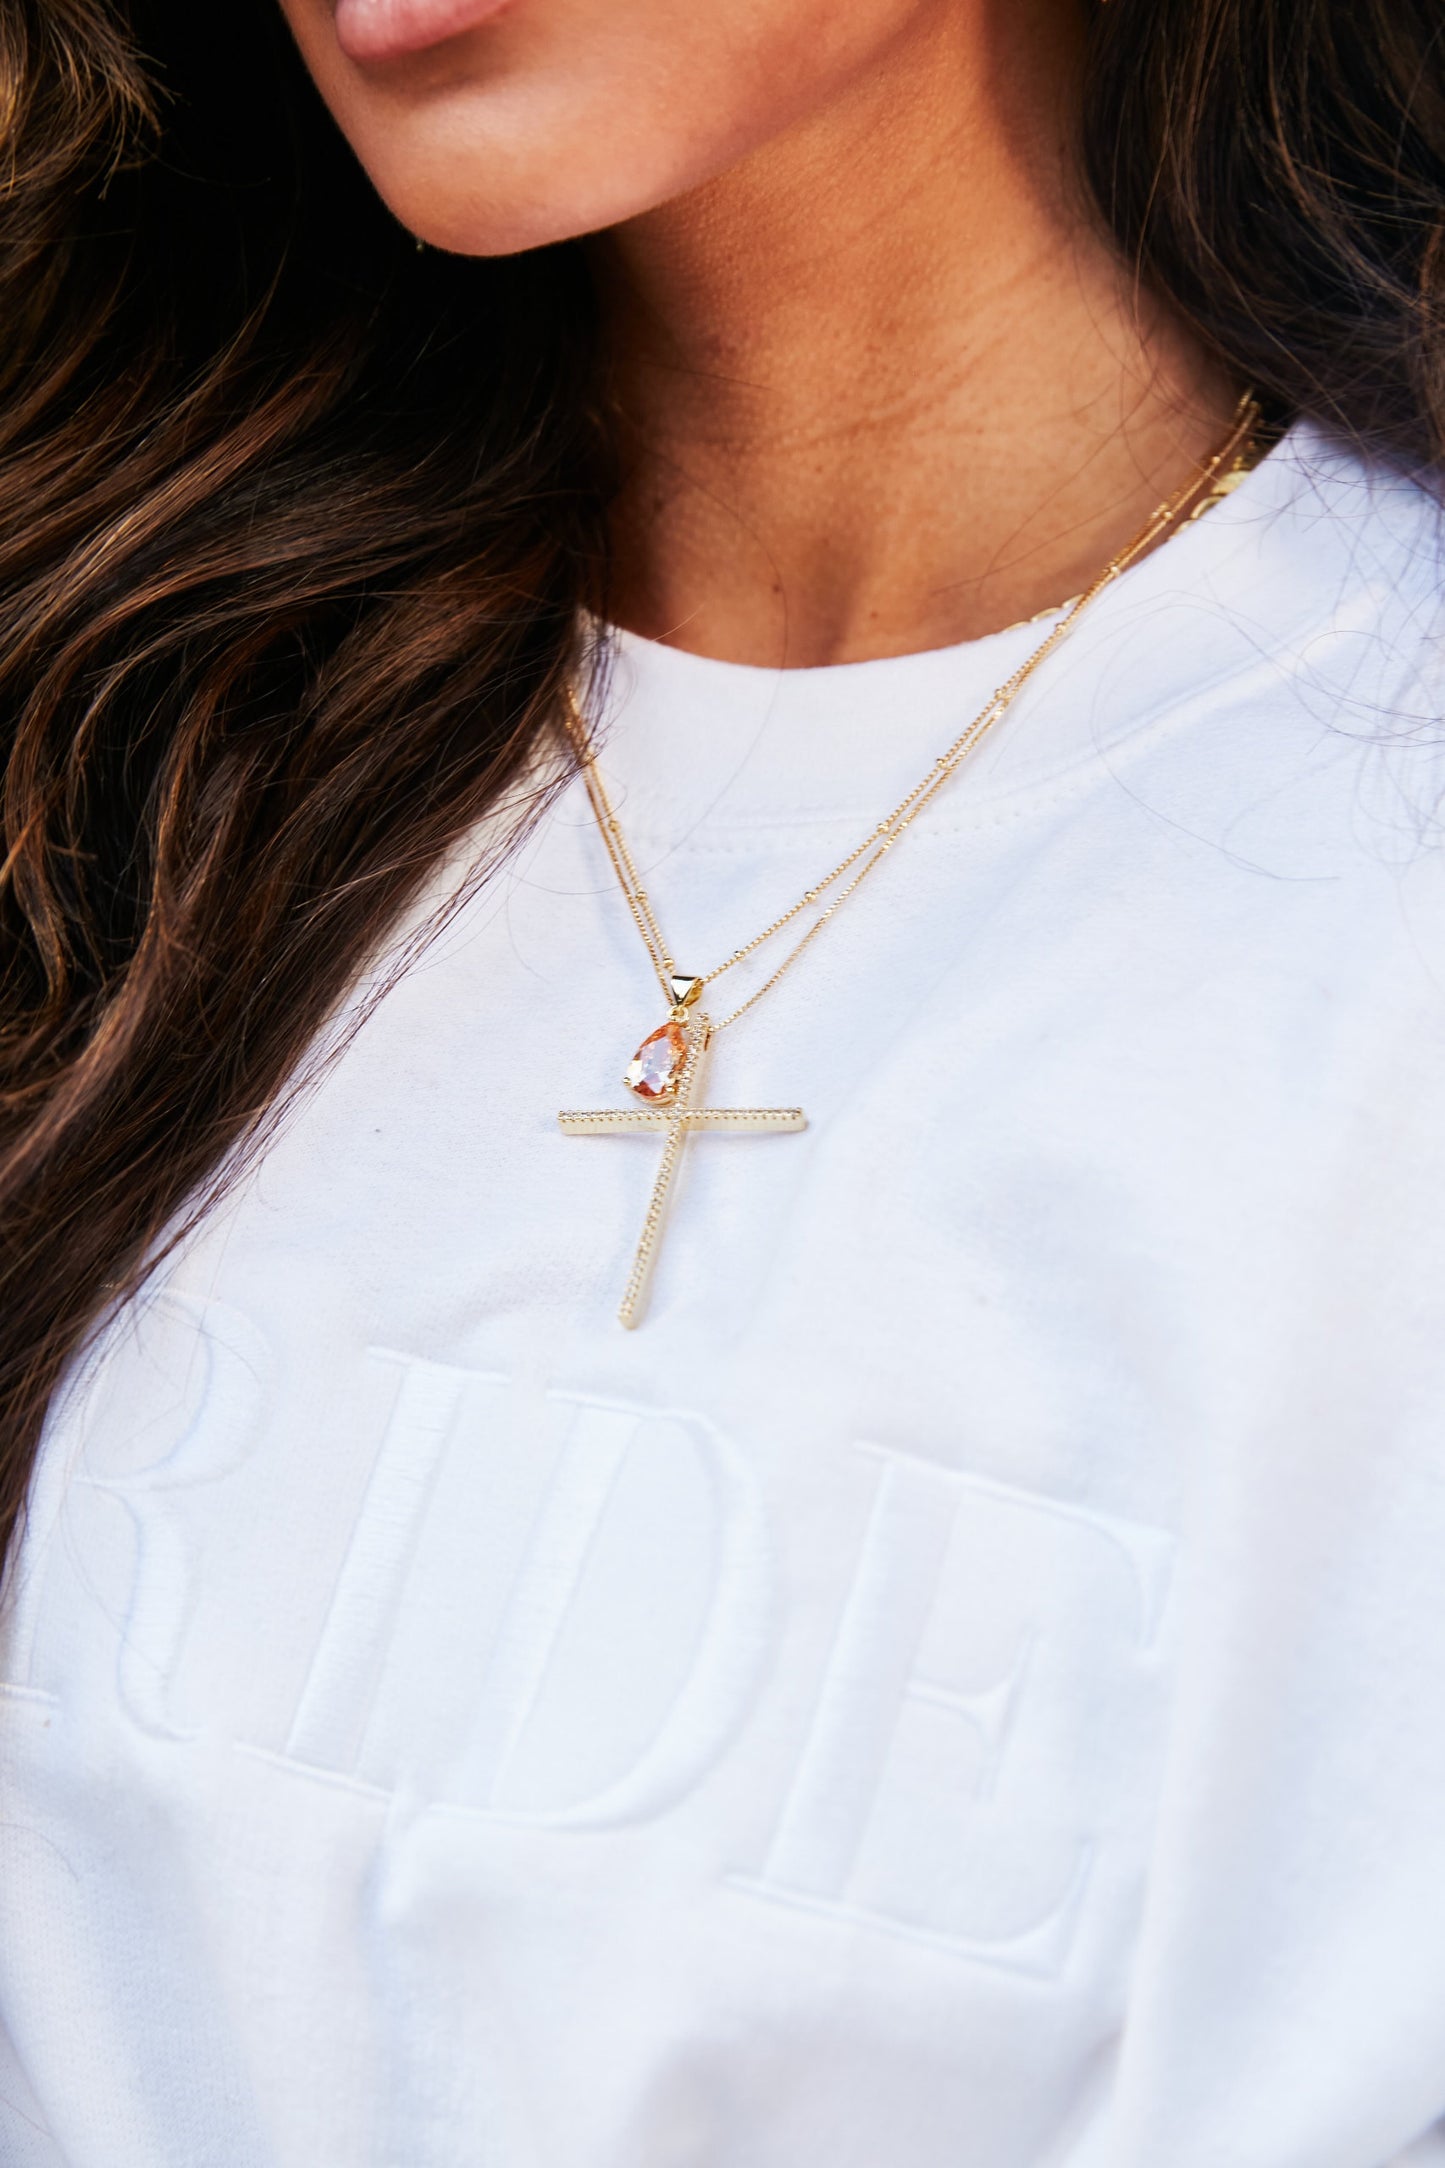 The 11/11 Cross Necklace